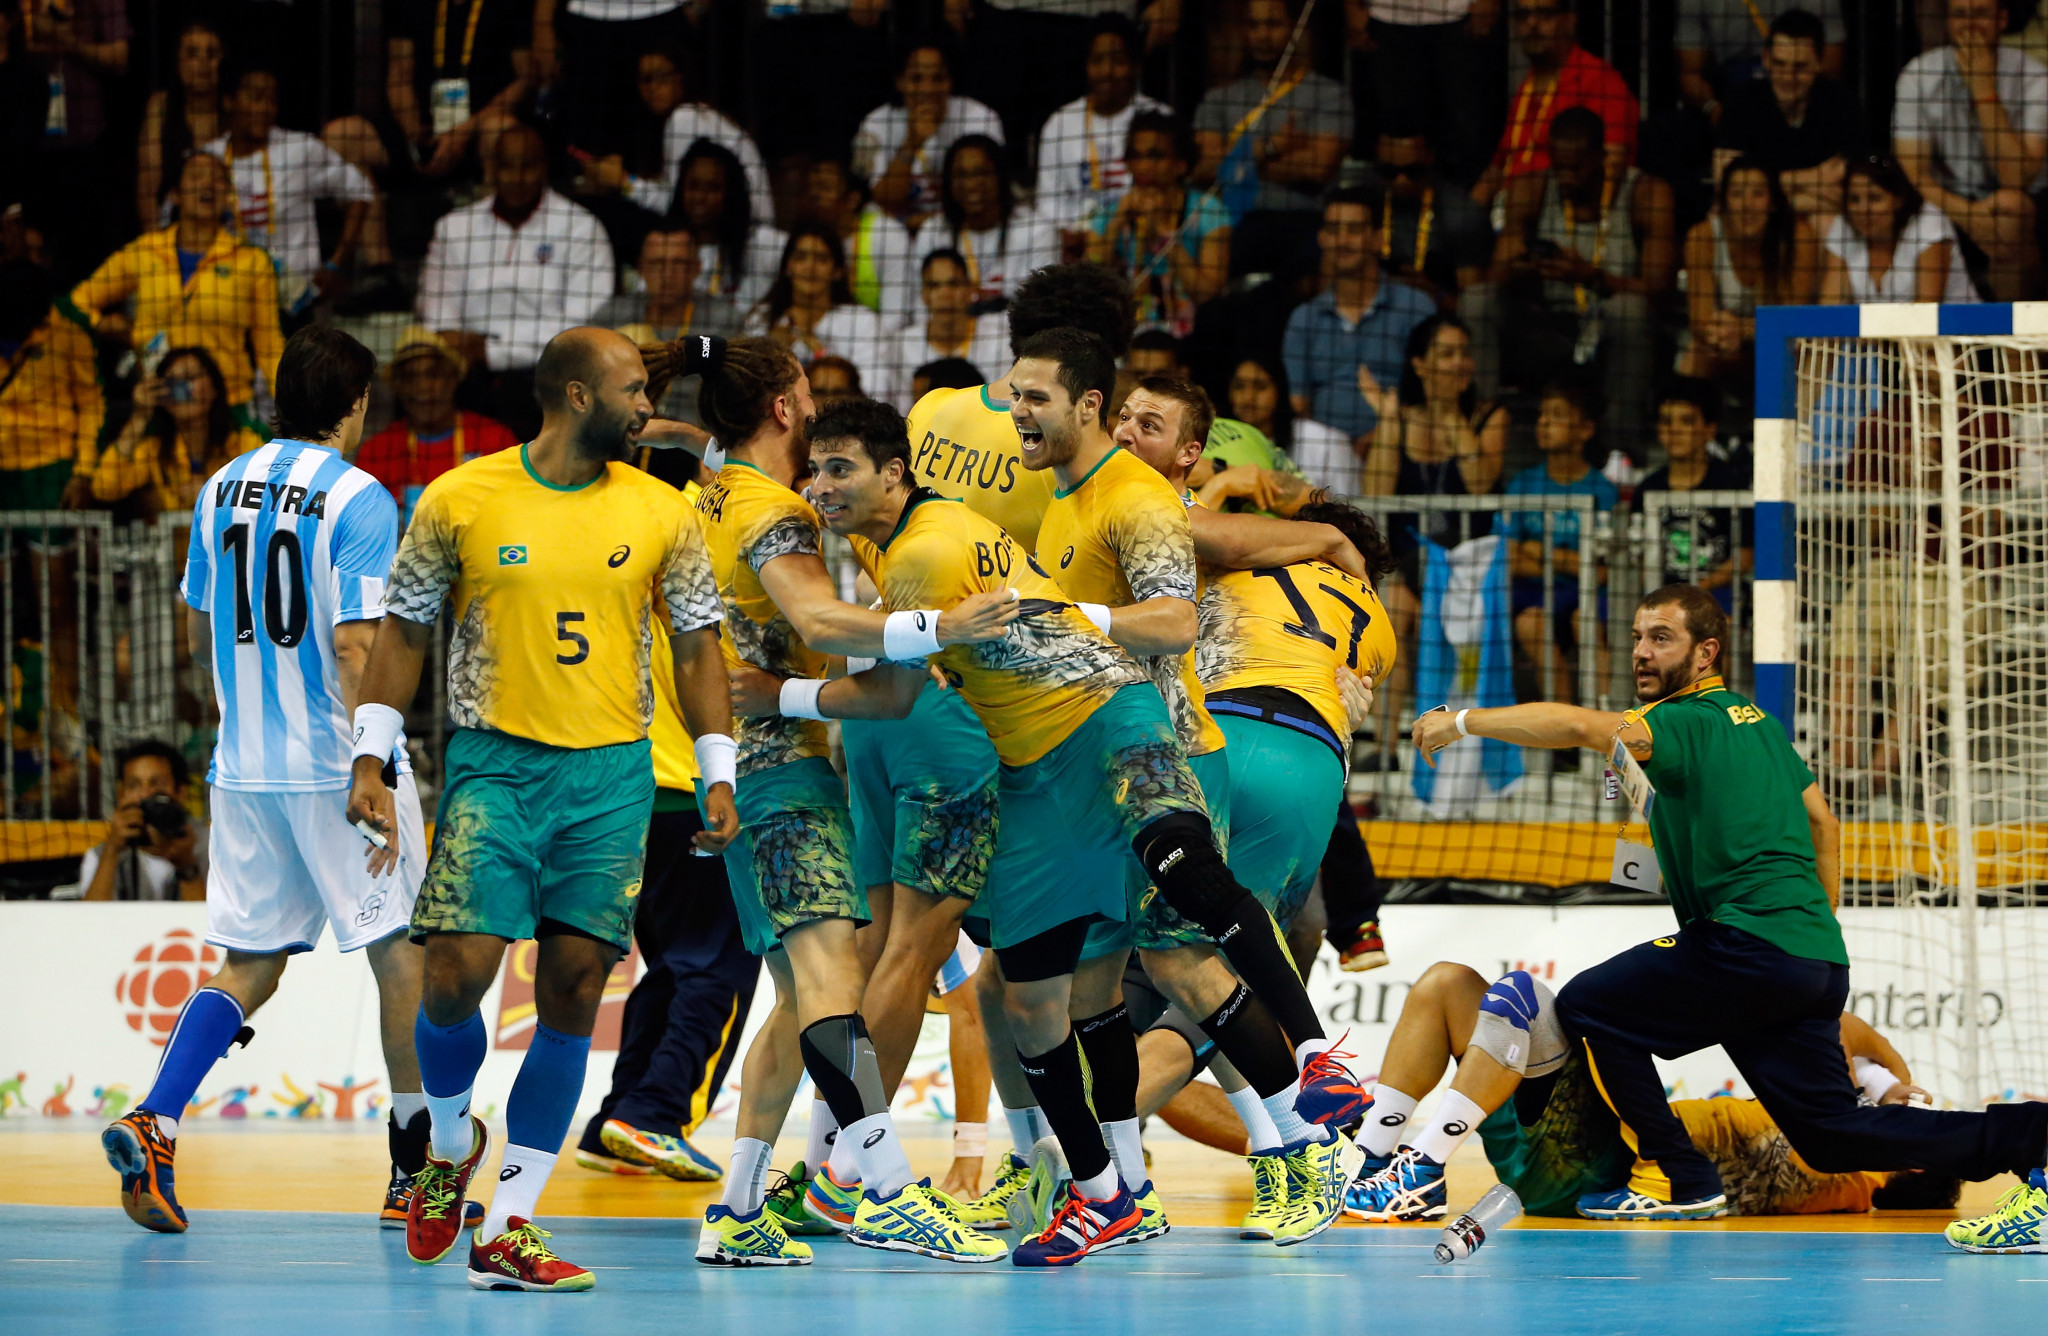 Brazil won both the men's and women's handball titles at the Toronto 2015 Pan American Games ©Getty Images